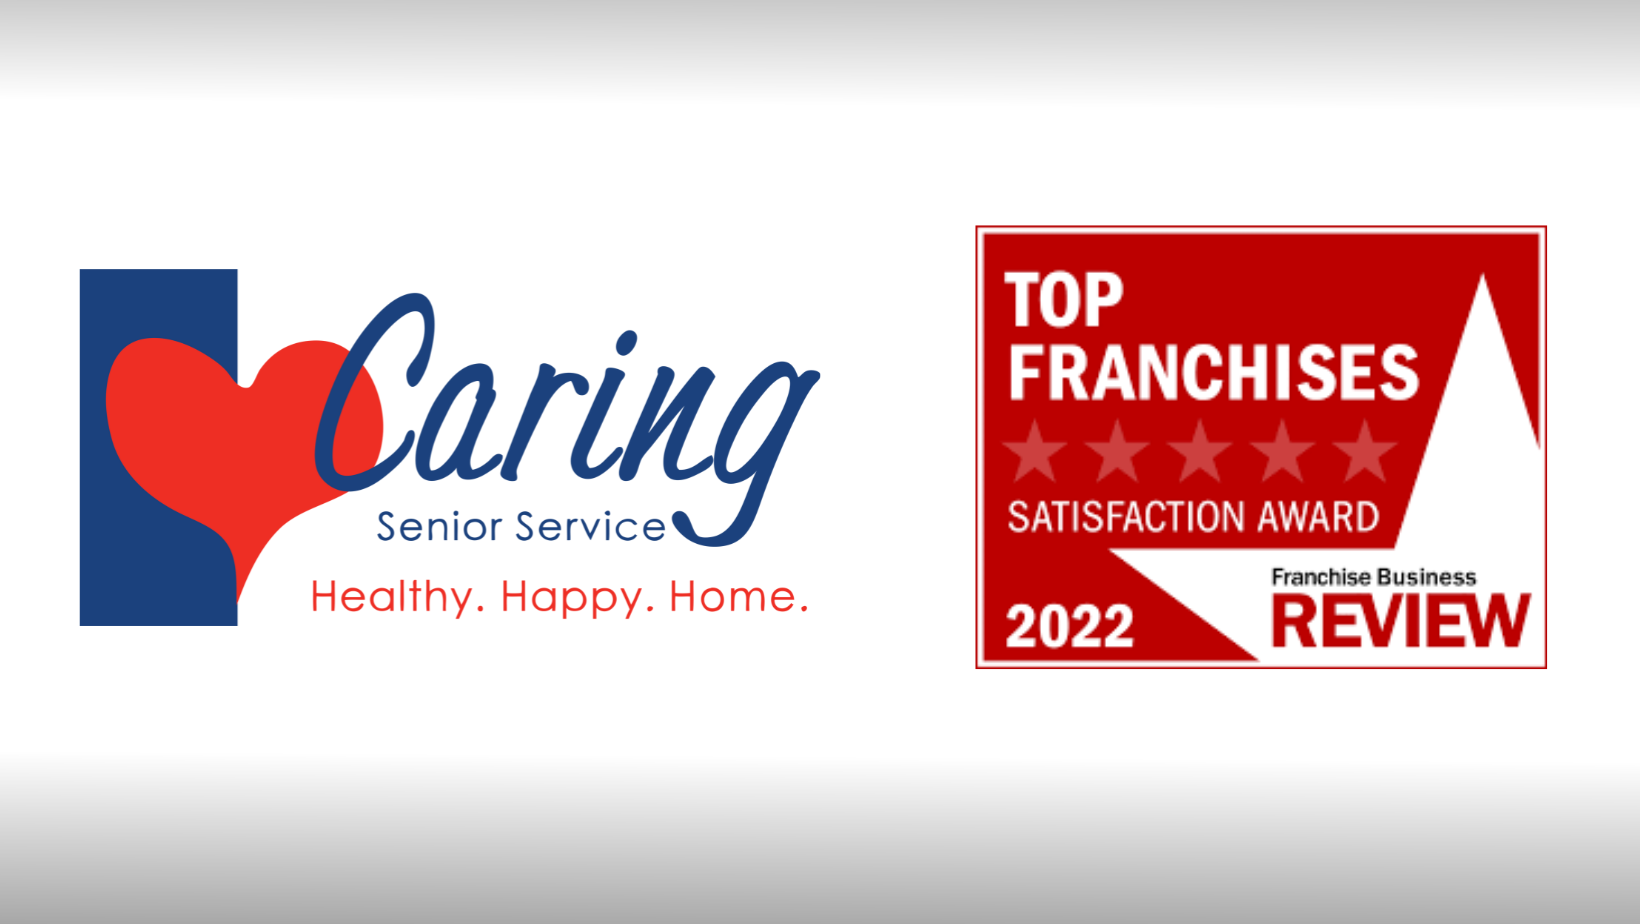 Caring Named Top Franchise 2022 by Franchise Business Review